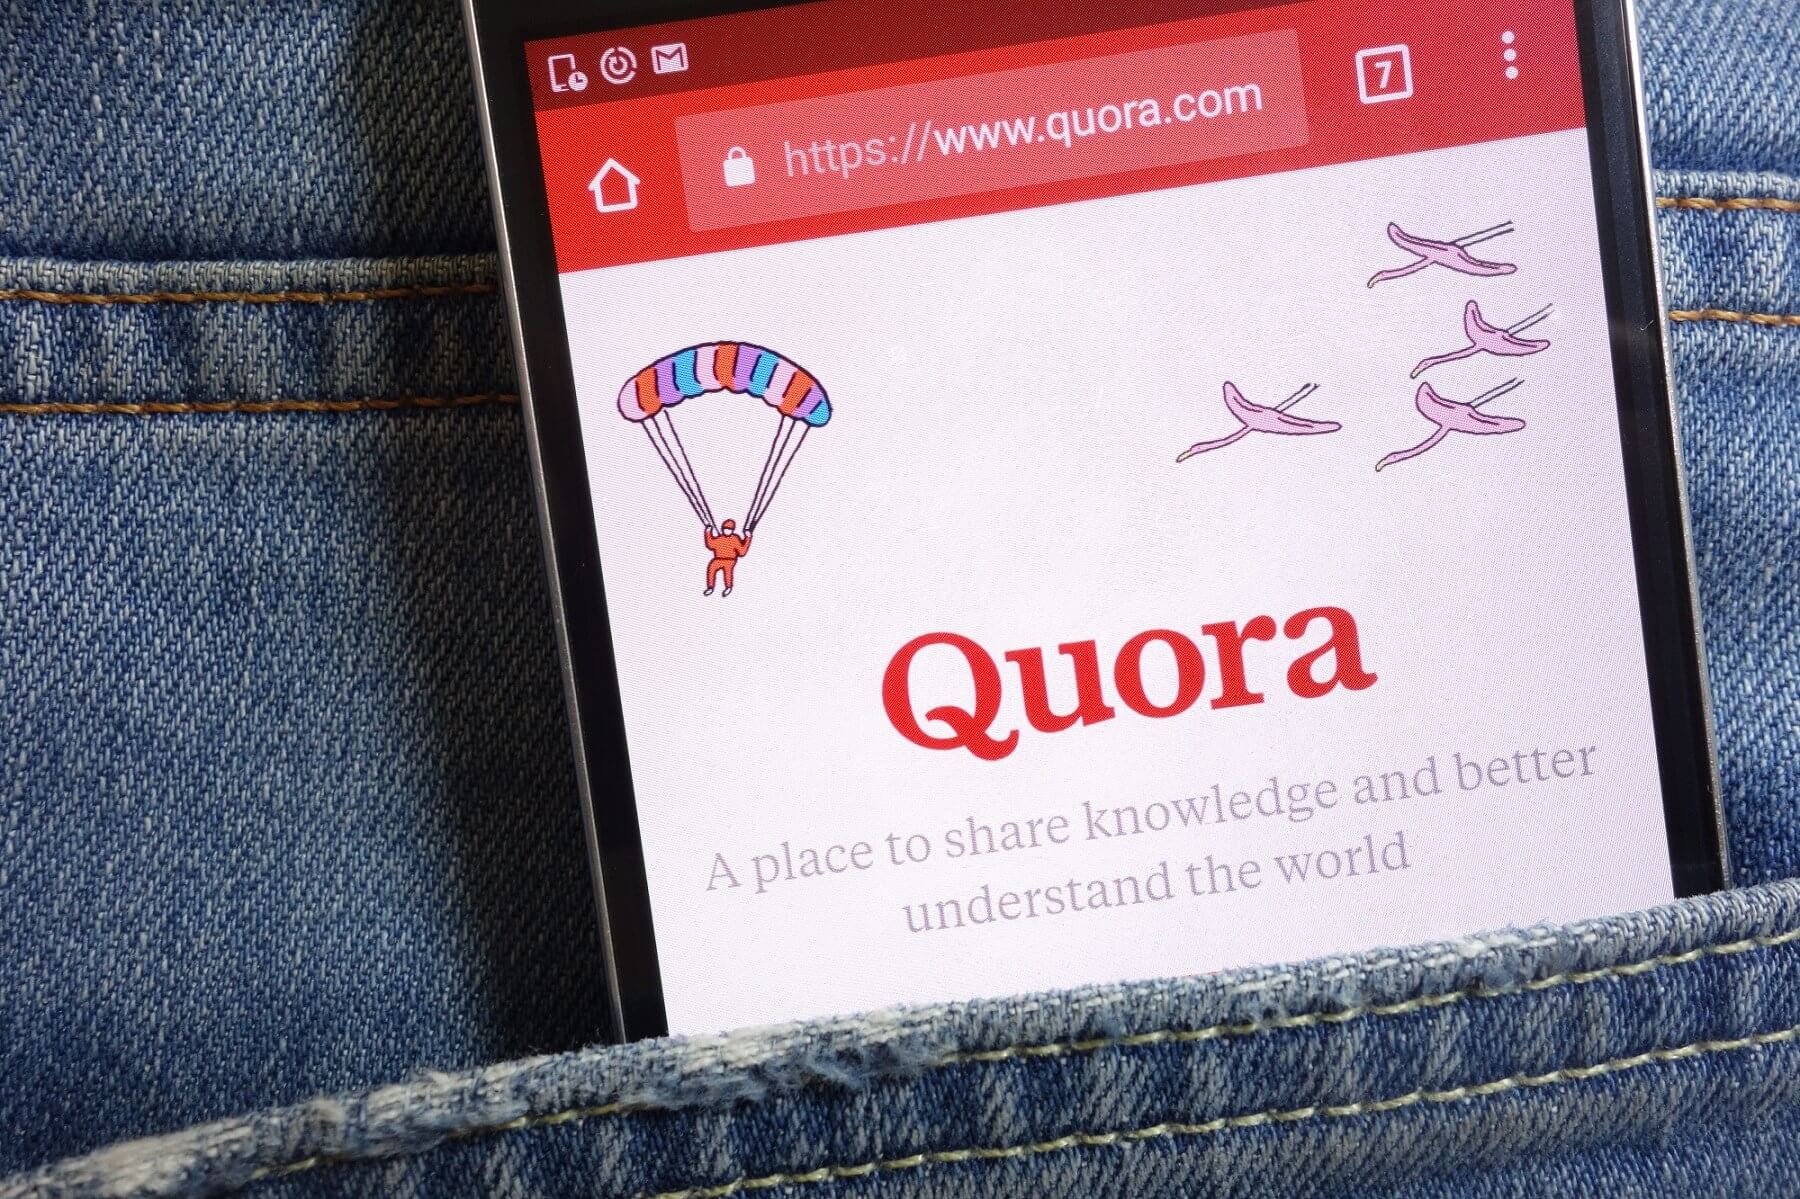 Quora reveals data breach that affected over 100 million users